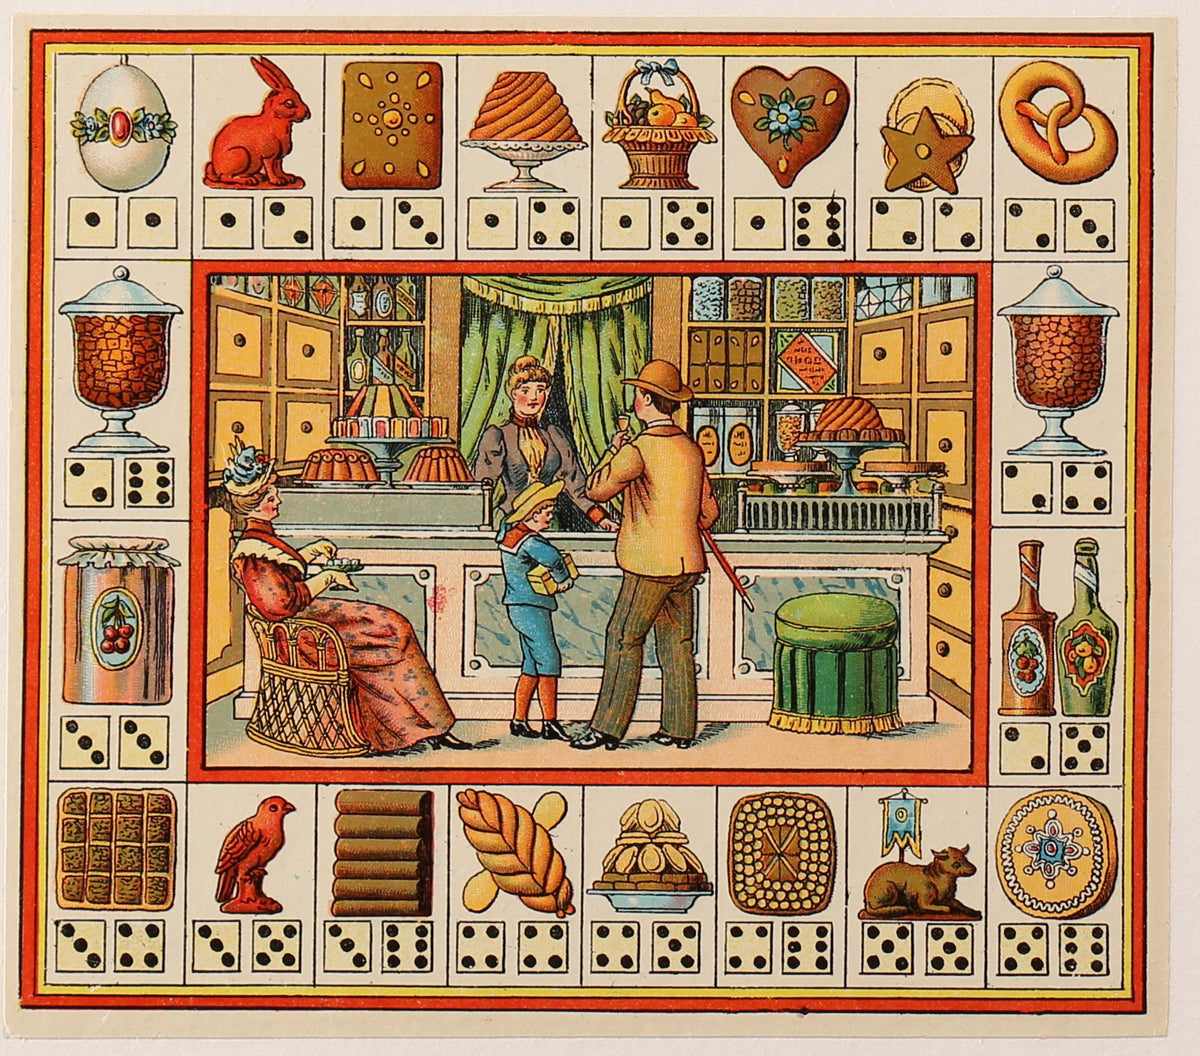 French Board Game - Bakery &amp; Spice Shops - 1900s - Authentic Vintage Antique Print